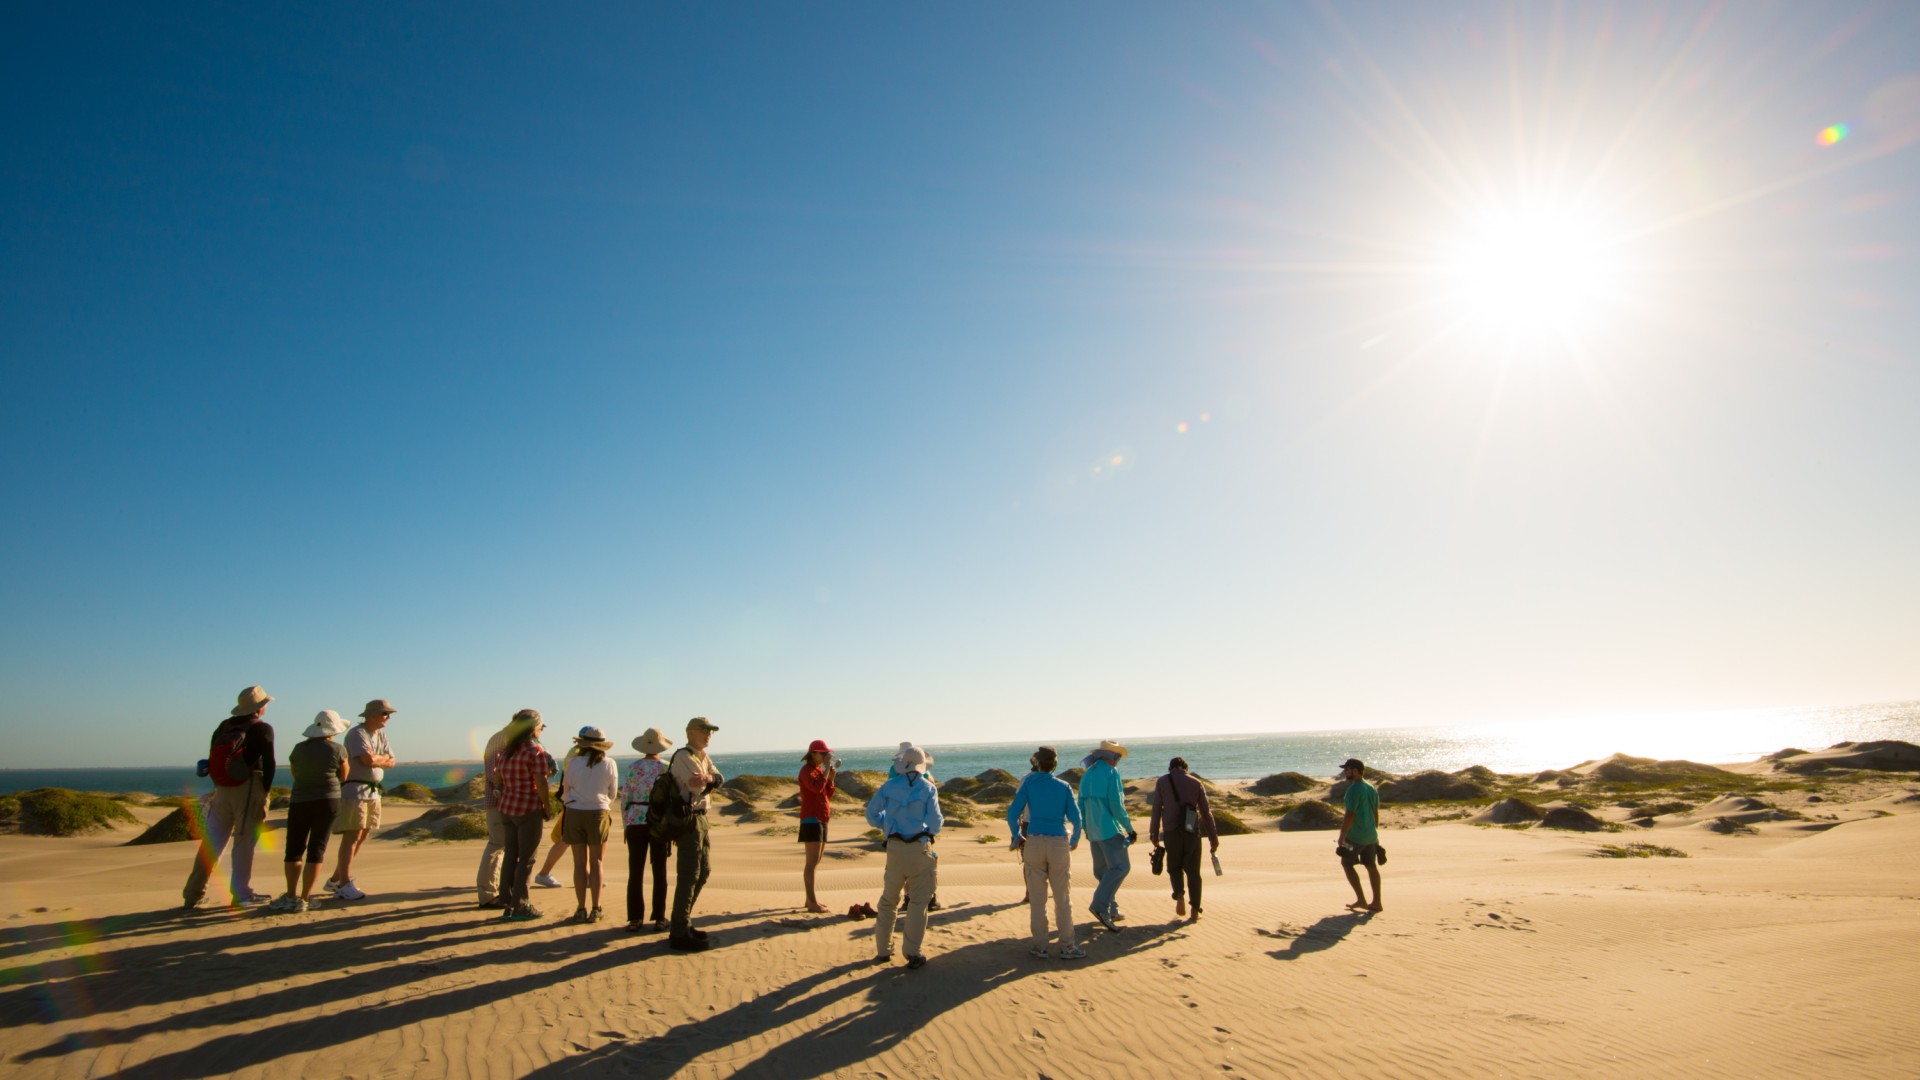 Group of people hiking the sand dunes of Magdalena Bay on a sunny day